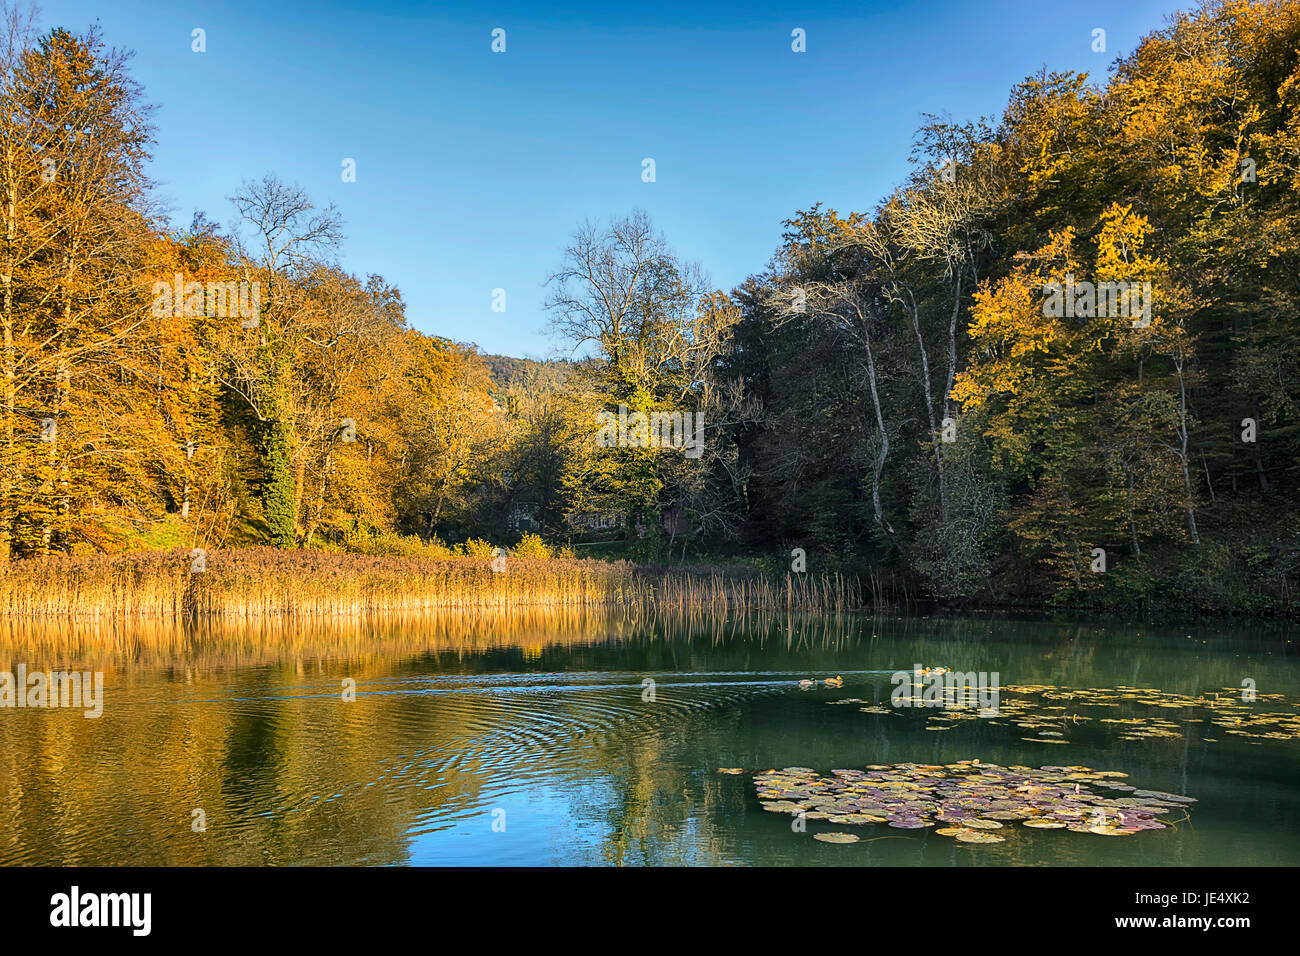 october mood at the upper pond Stock Photo